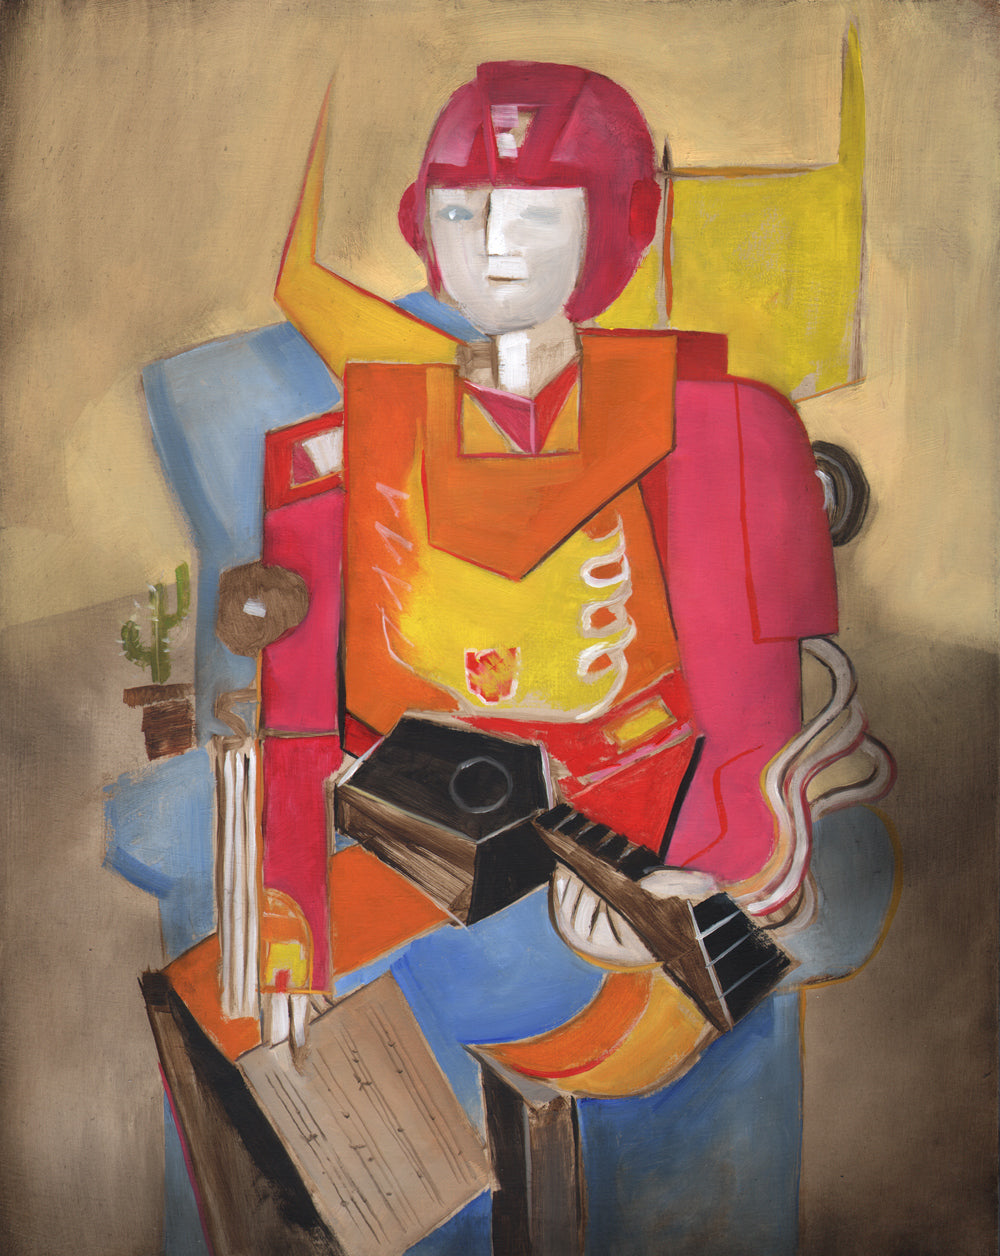 Painting of Hot Rod playing guitar